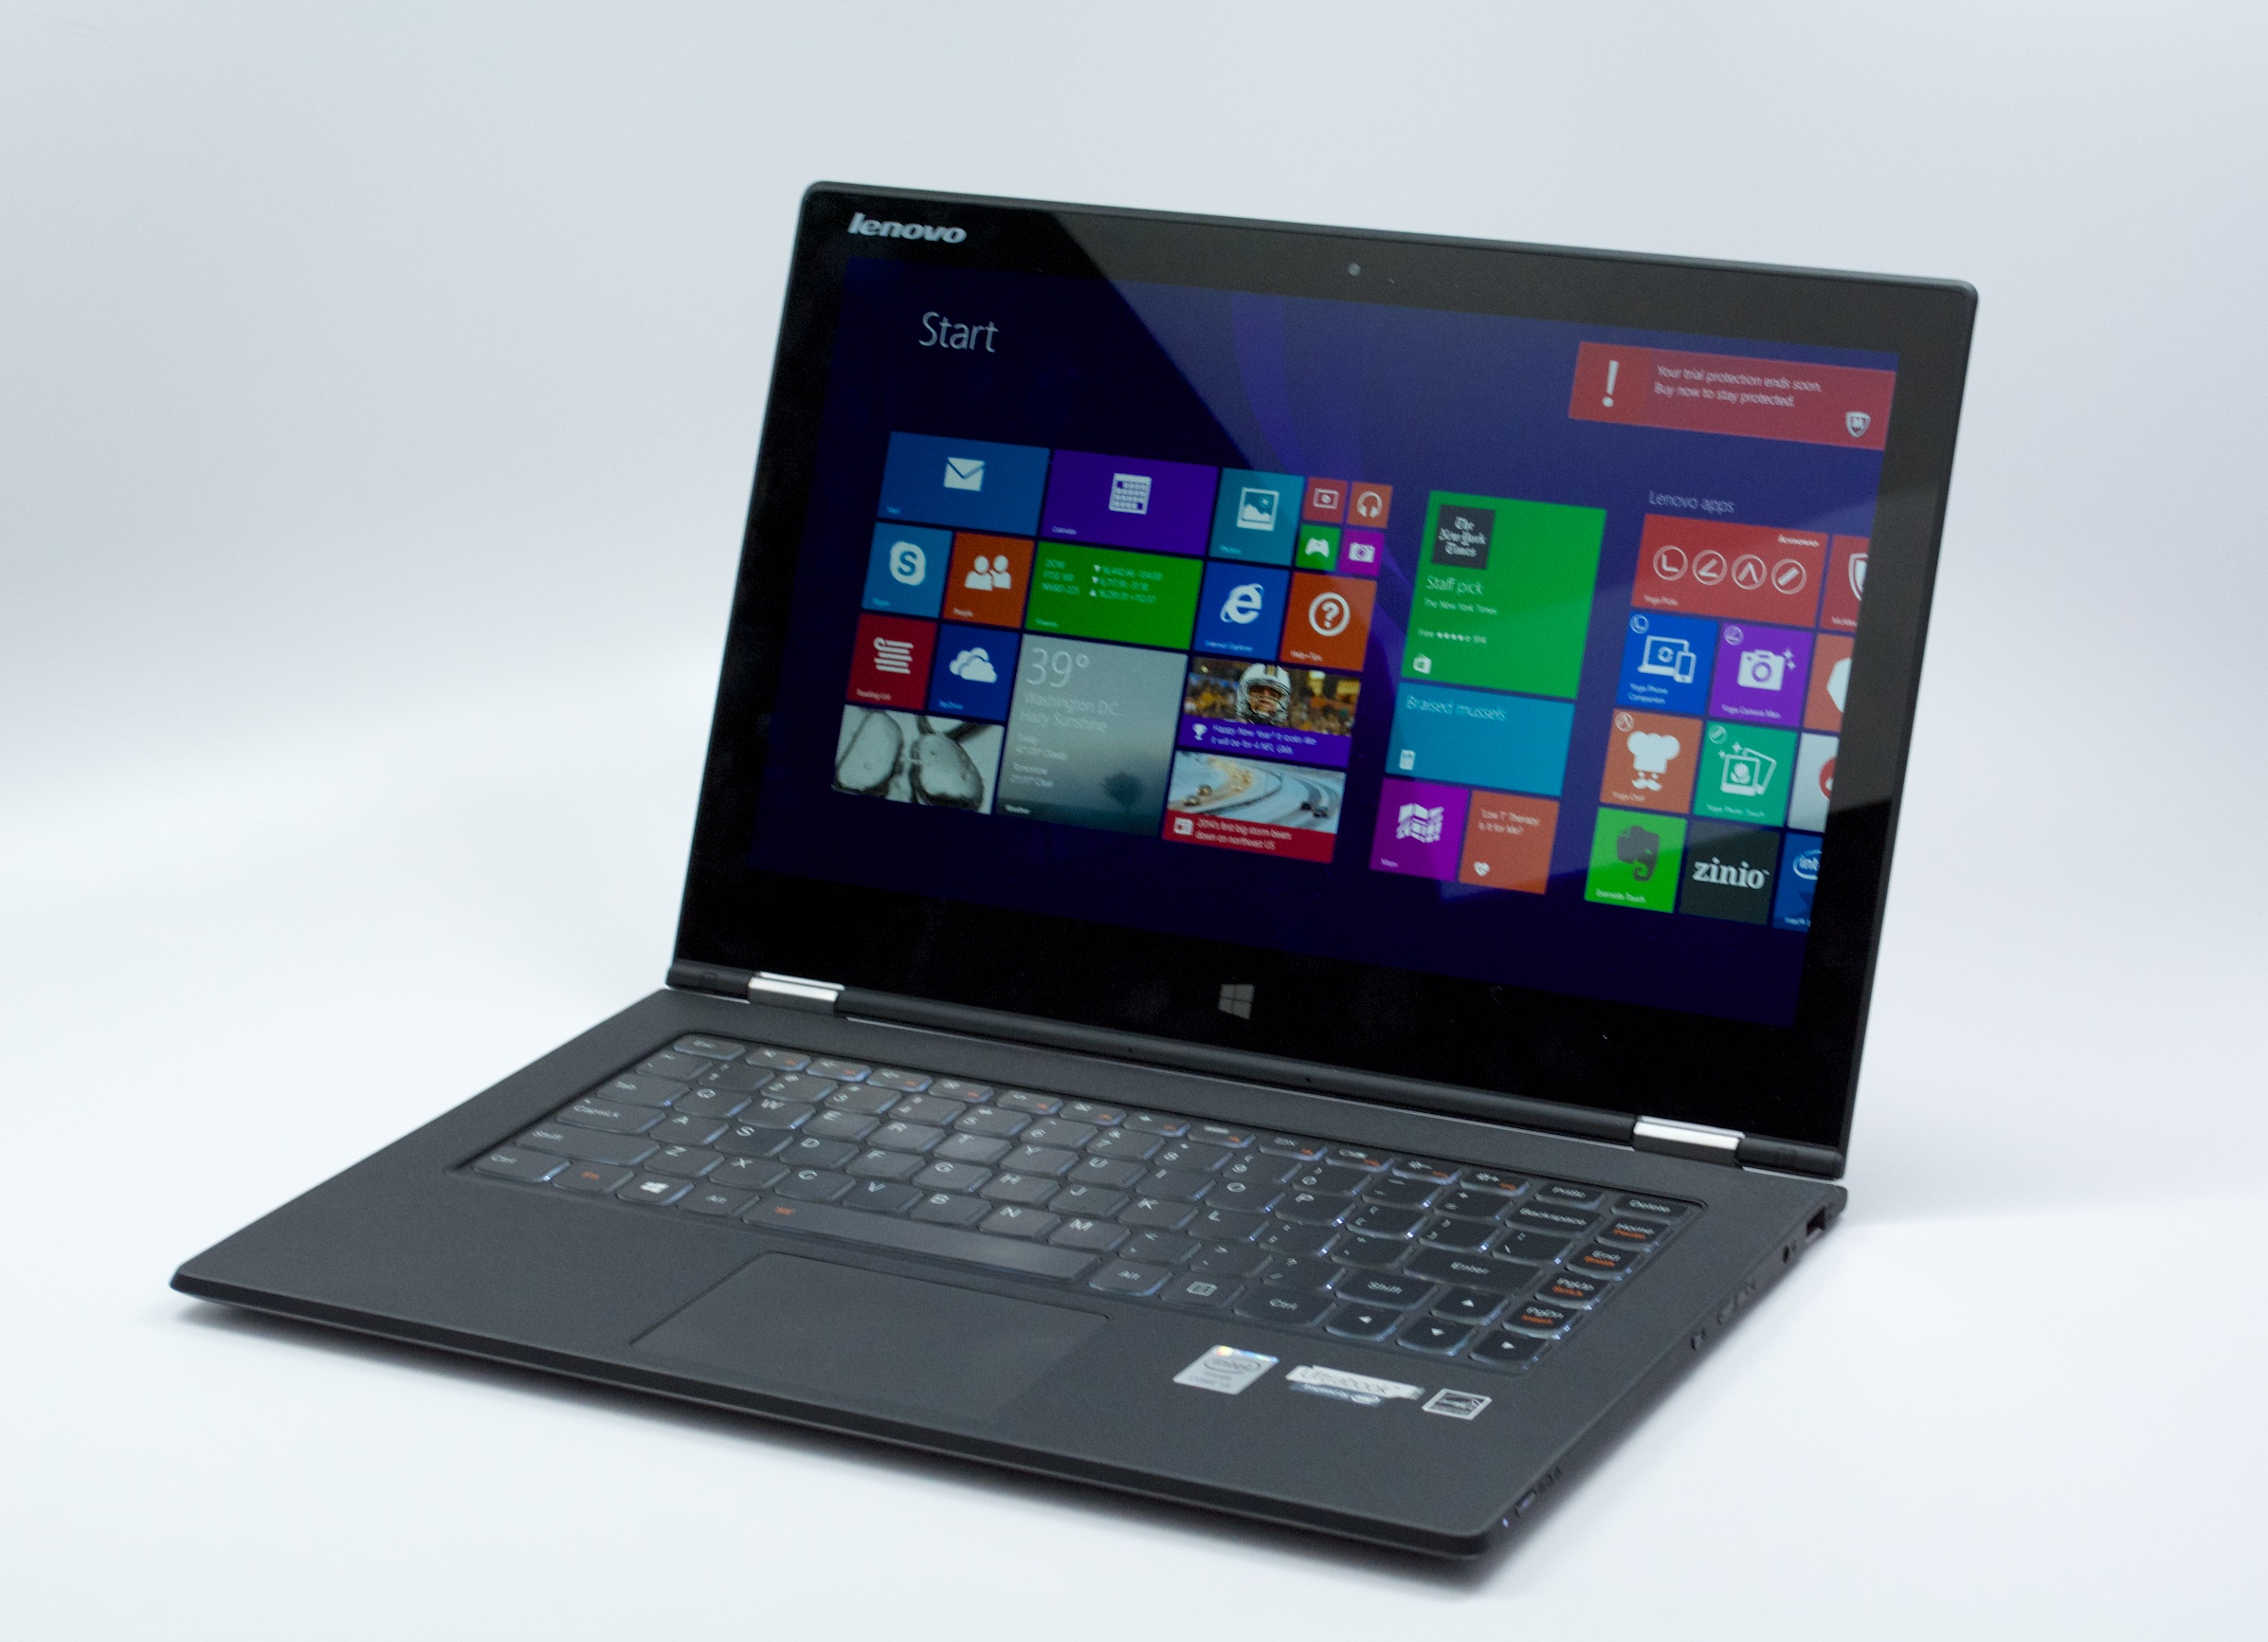 The Lenovo Yoga Pro Is A Great Notebook